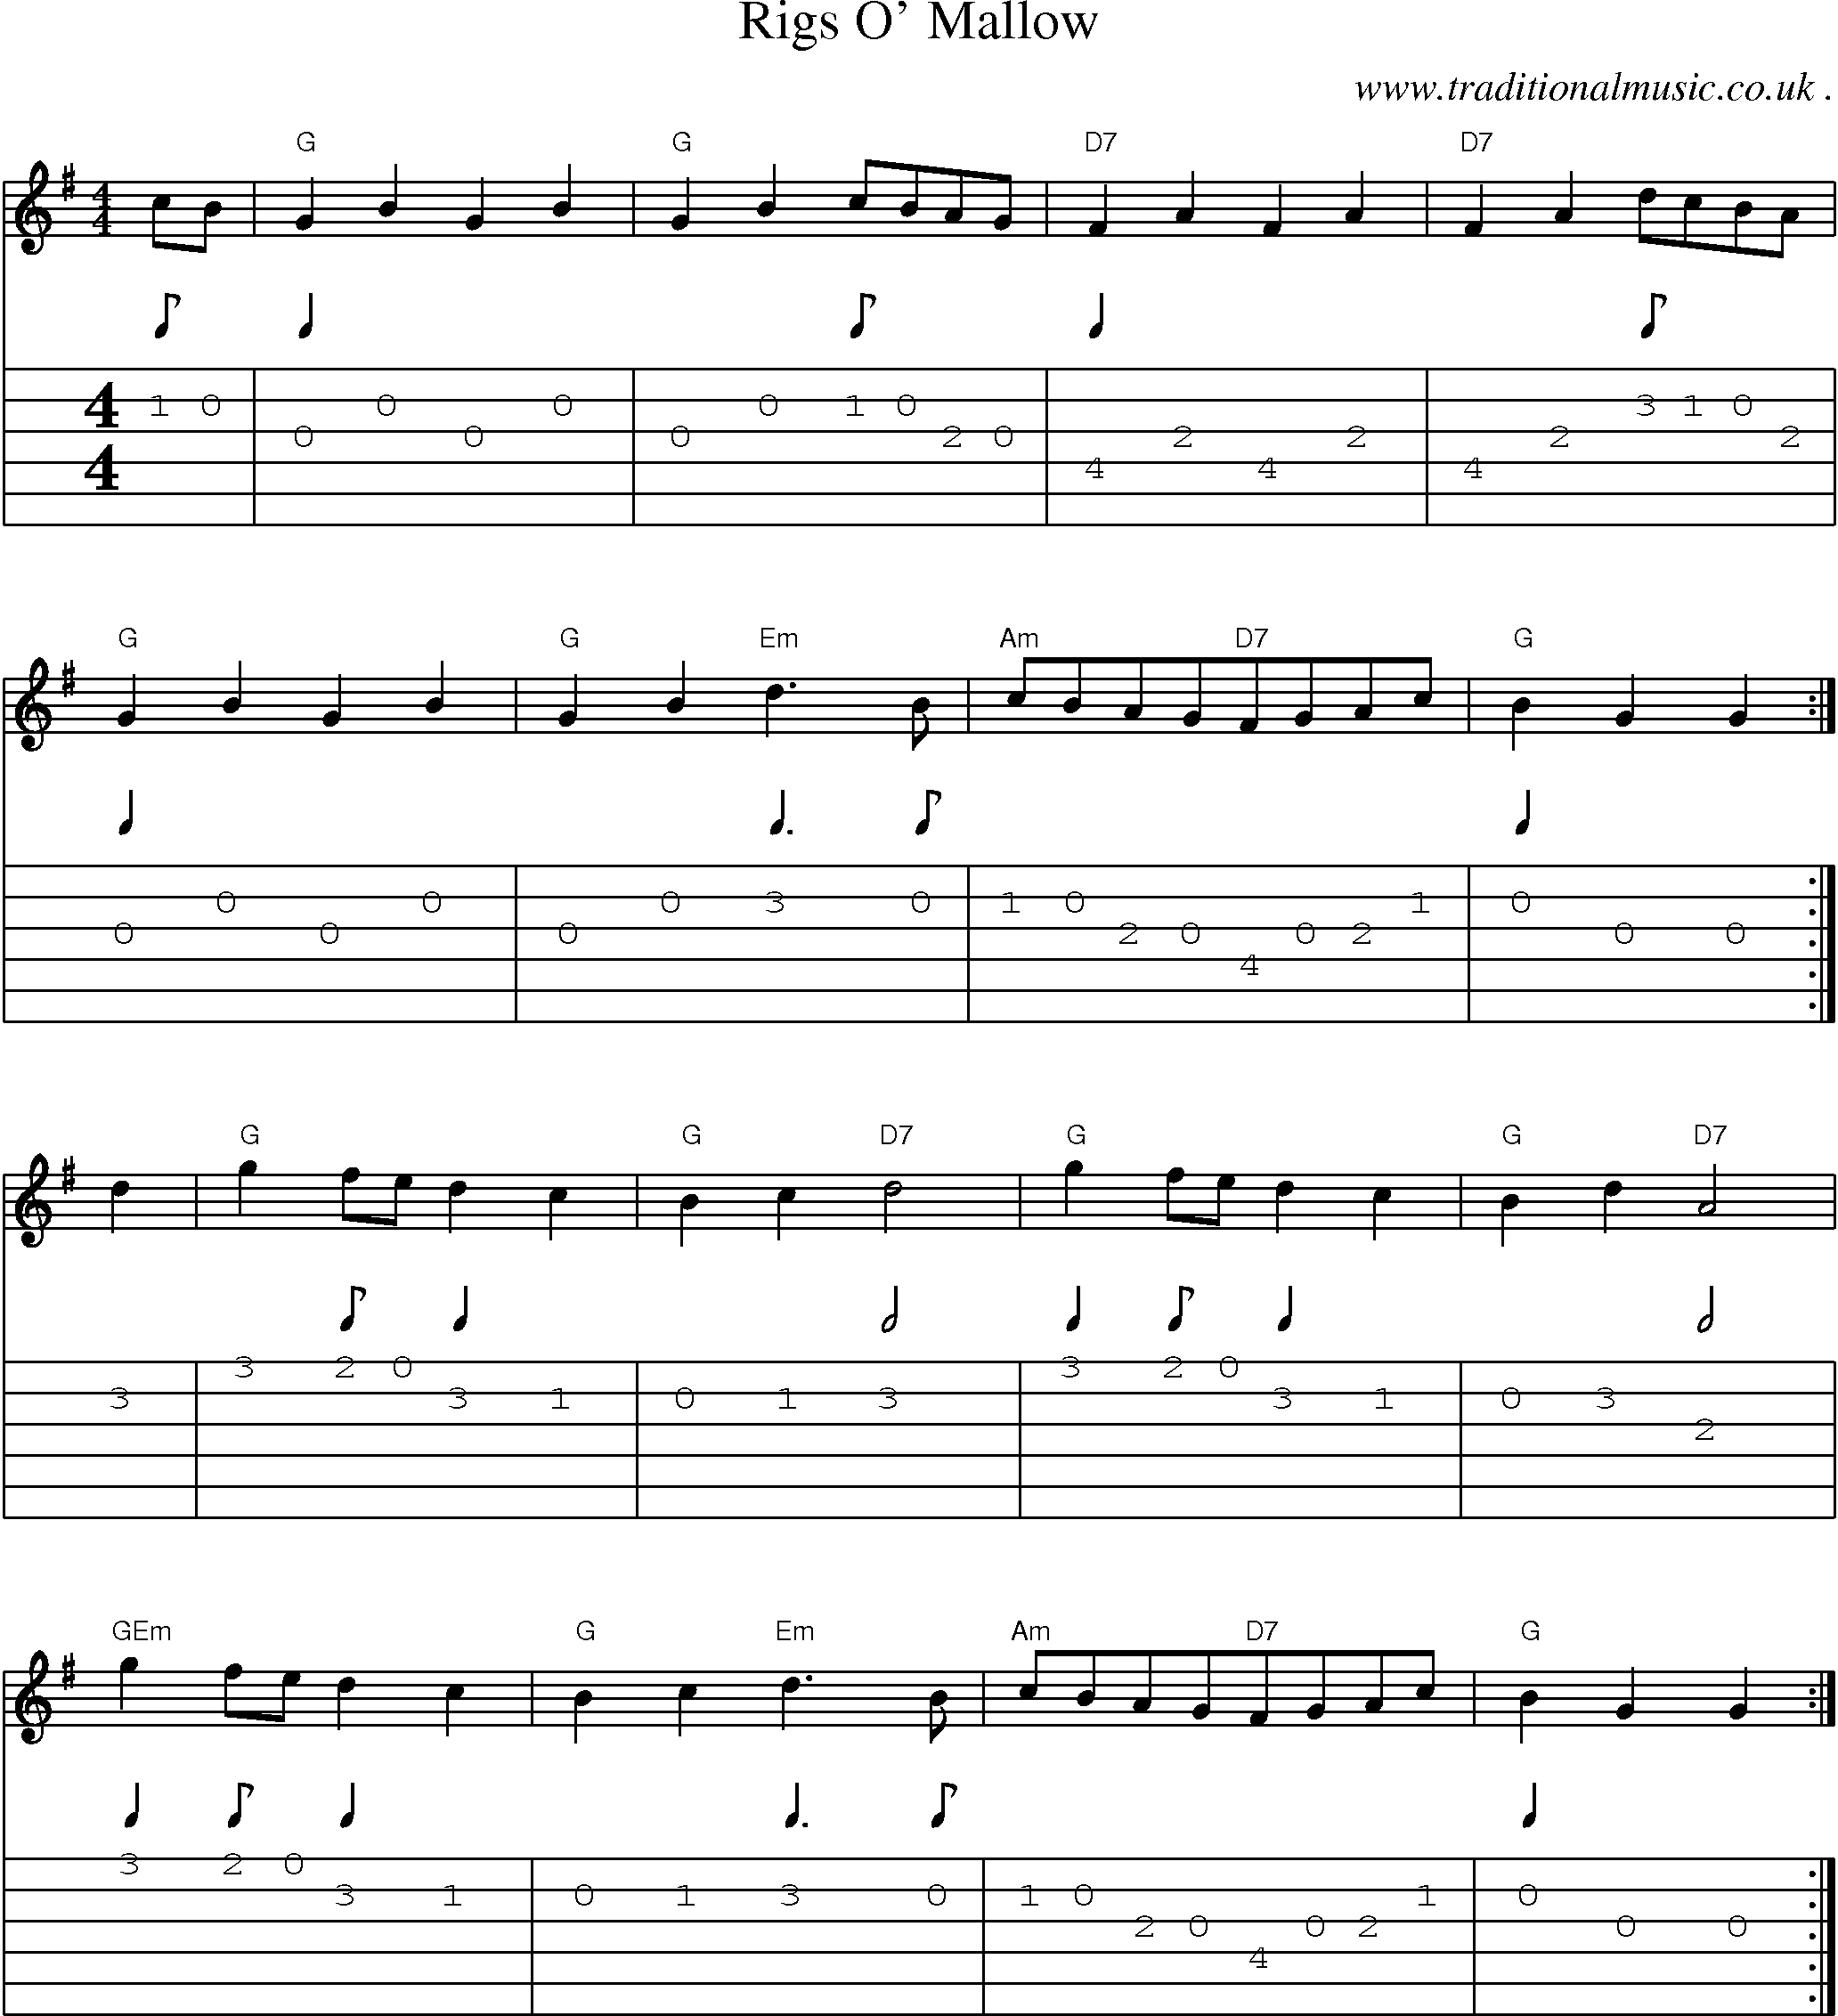 Sheet-Music and Guitar Tabs for Rigs O Mallow